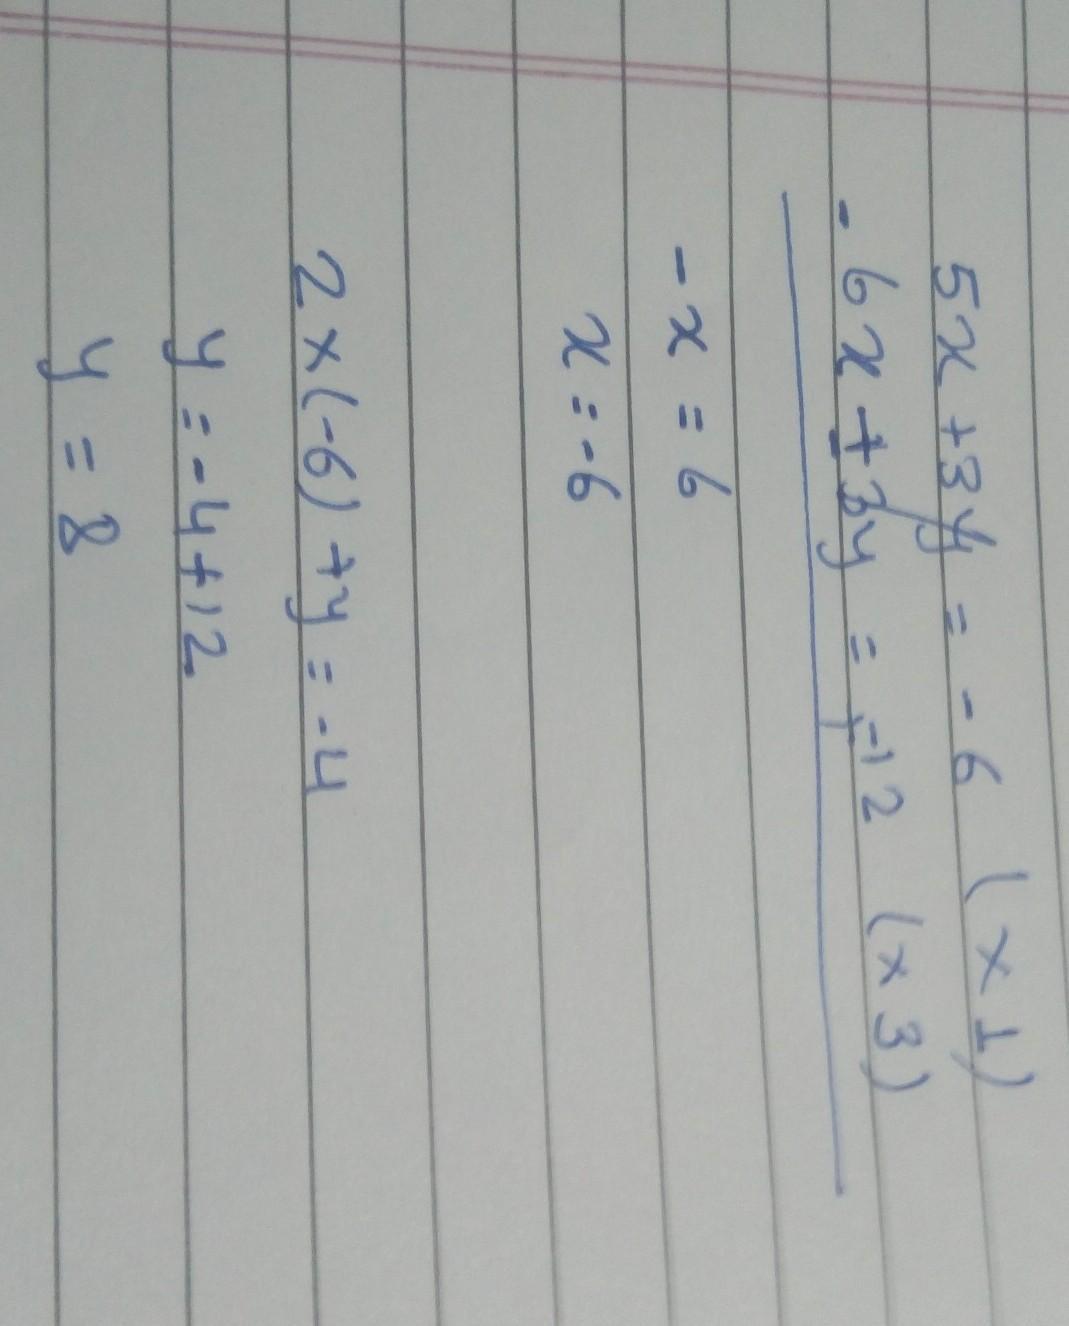 A System Of Equations Is Show Below 5x + 3y=-6 2x+y=-4 Which Statement About The Ordered Pair (-6,8)